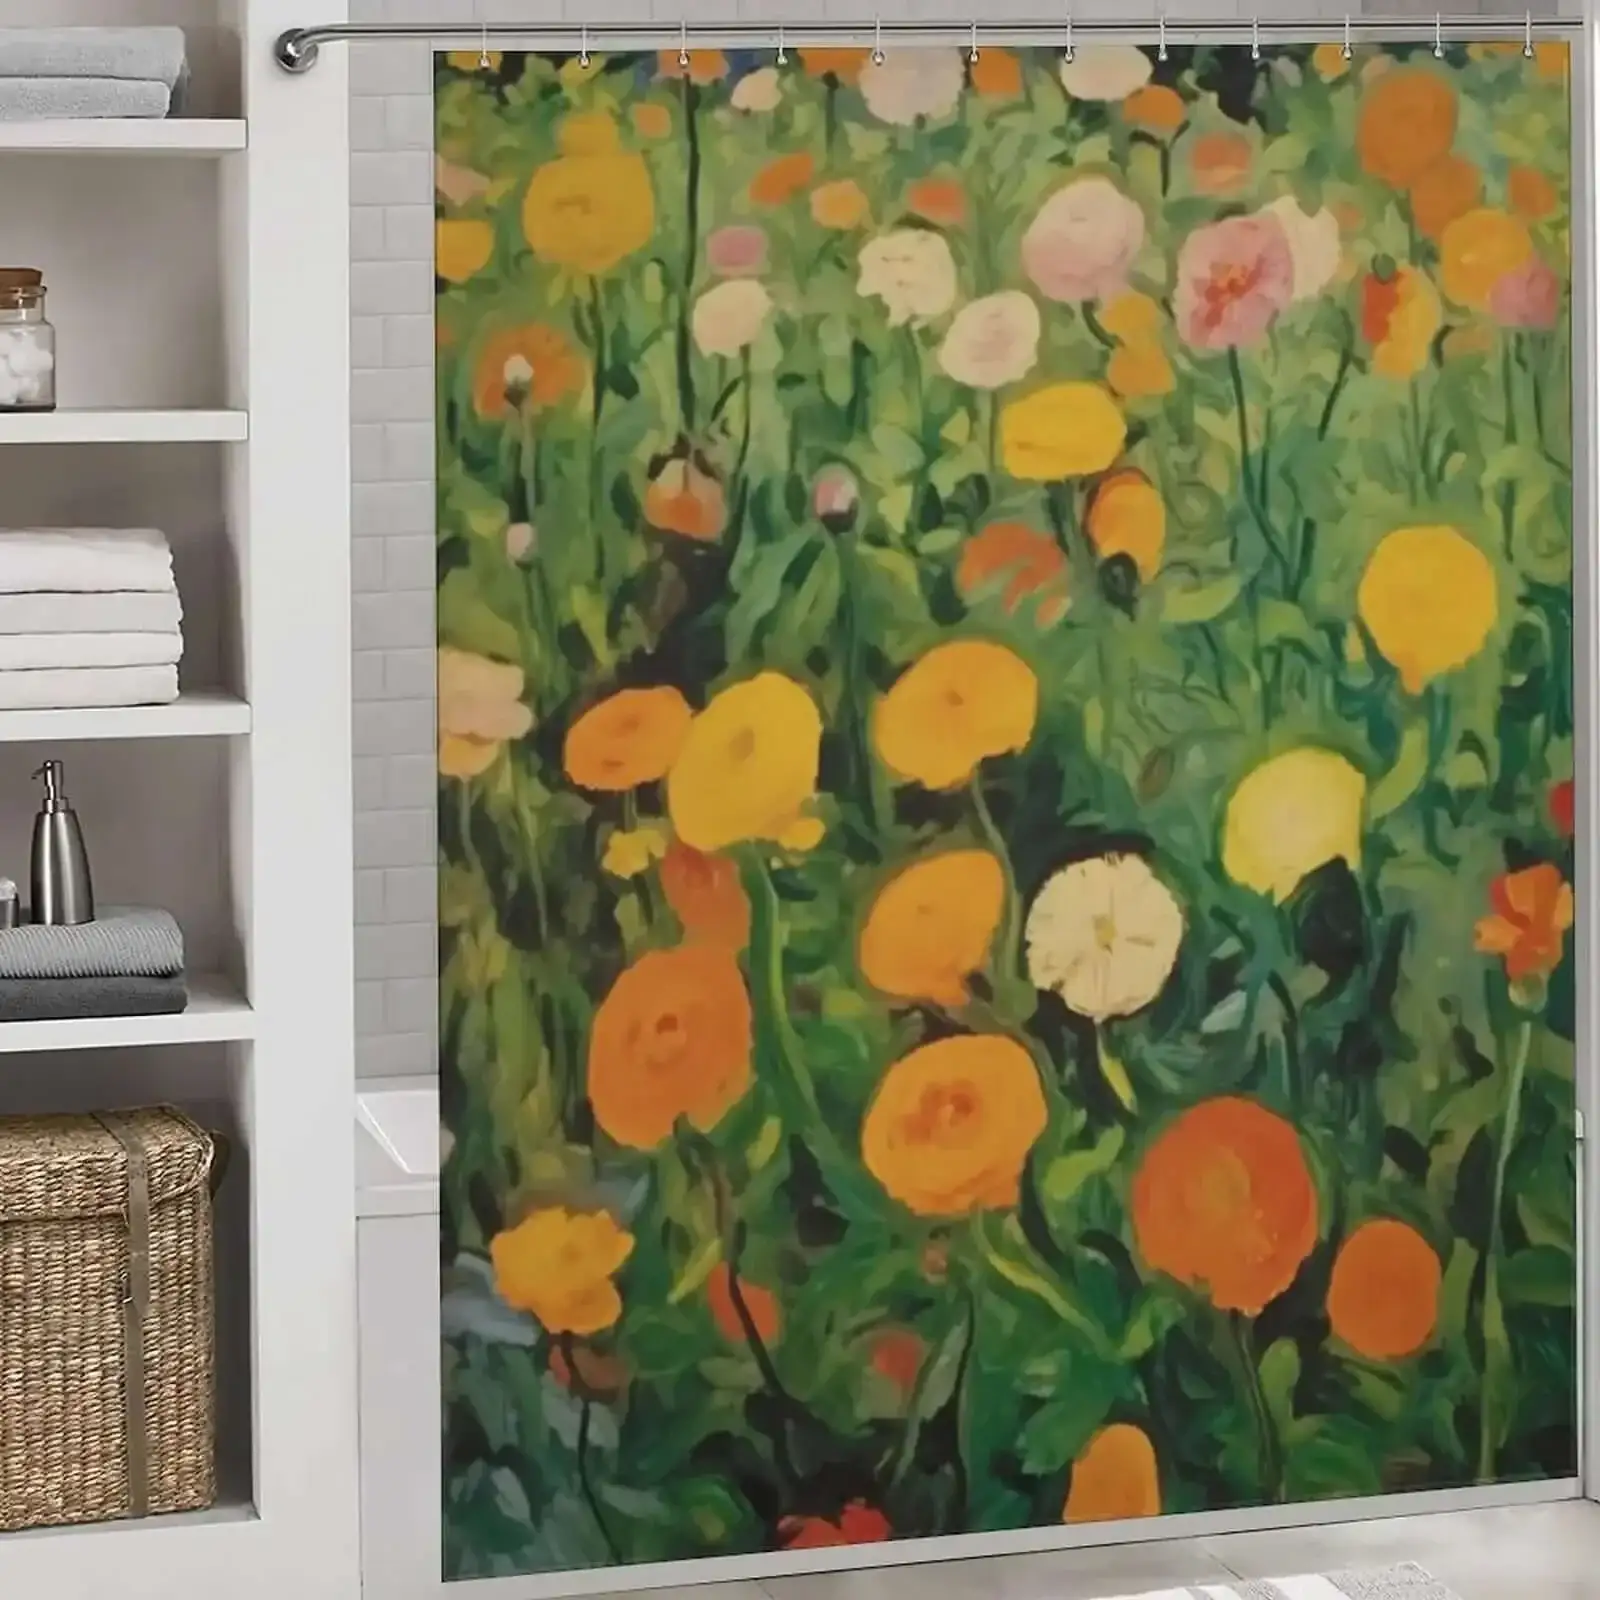 Guest bathroom shower curtain ideas: A shower curtain with a painting of a field of flowers.